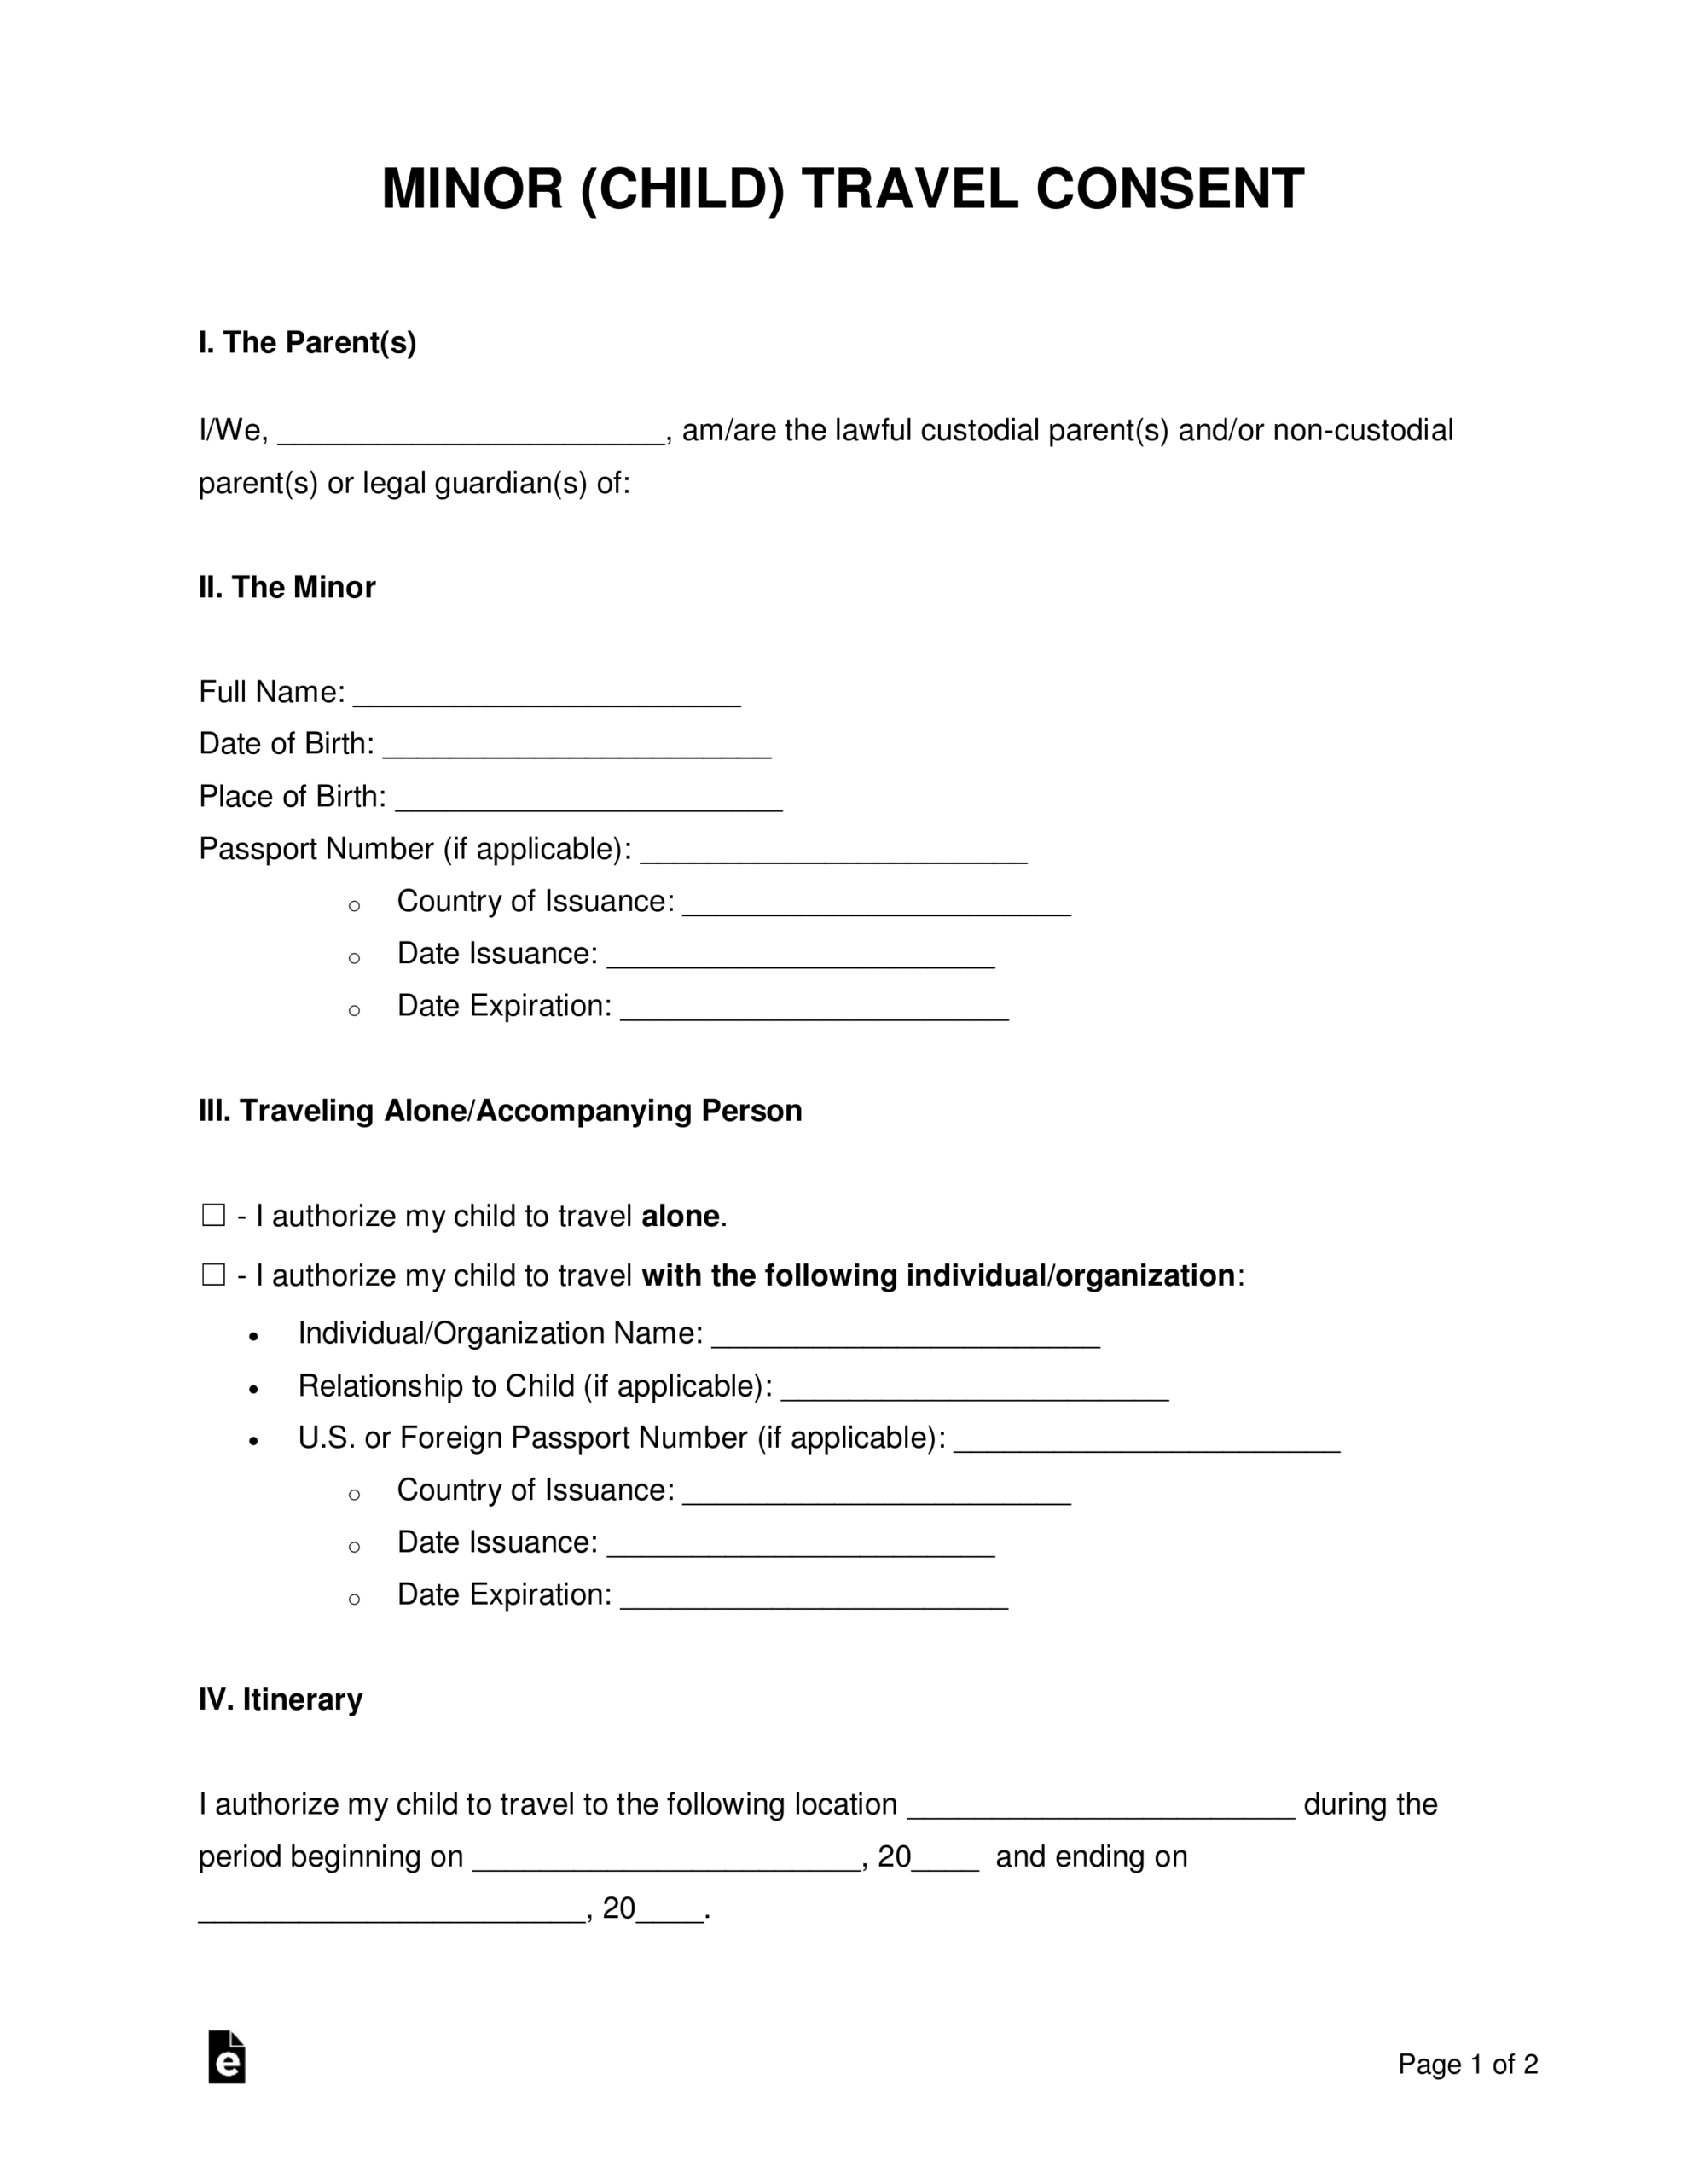 Free Minor (Child) Travel Consent Form - Pdf | Word | Eforms Inside Notarized Letter Template For Child Travel